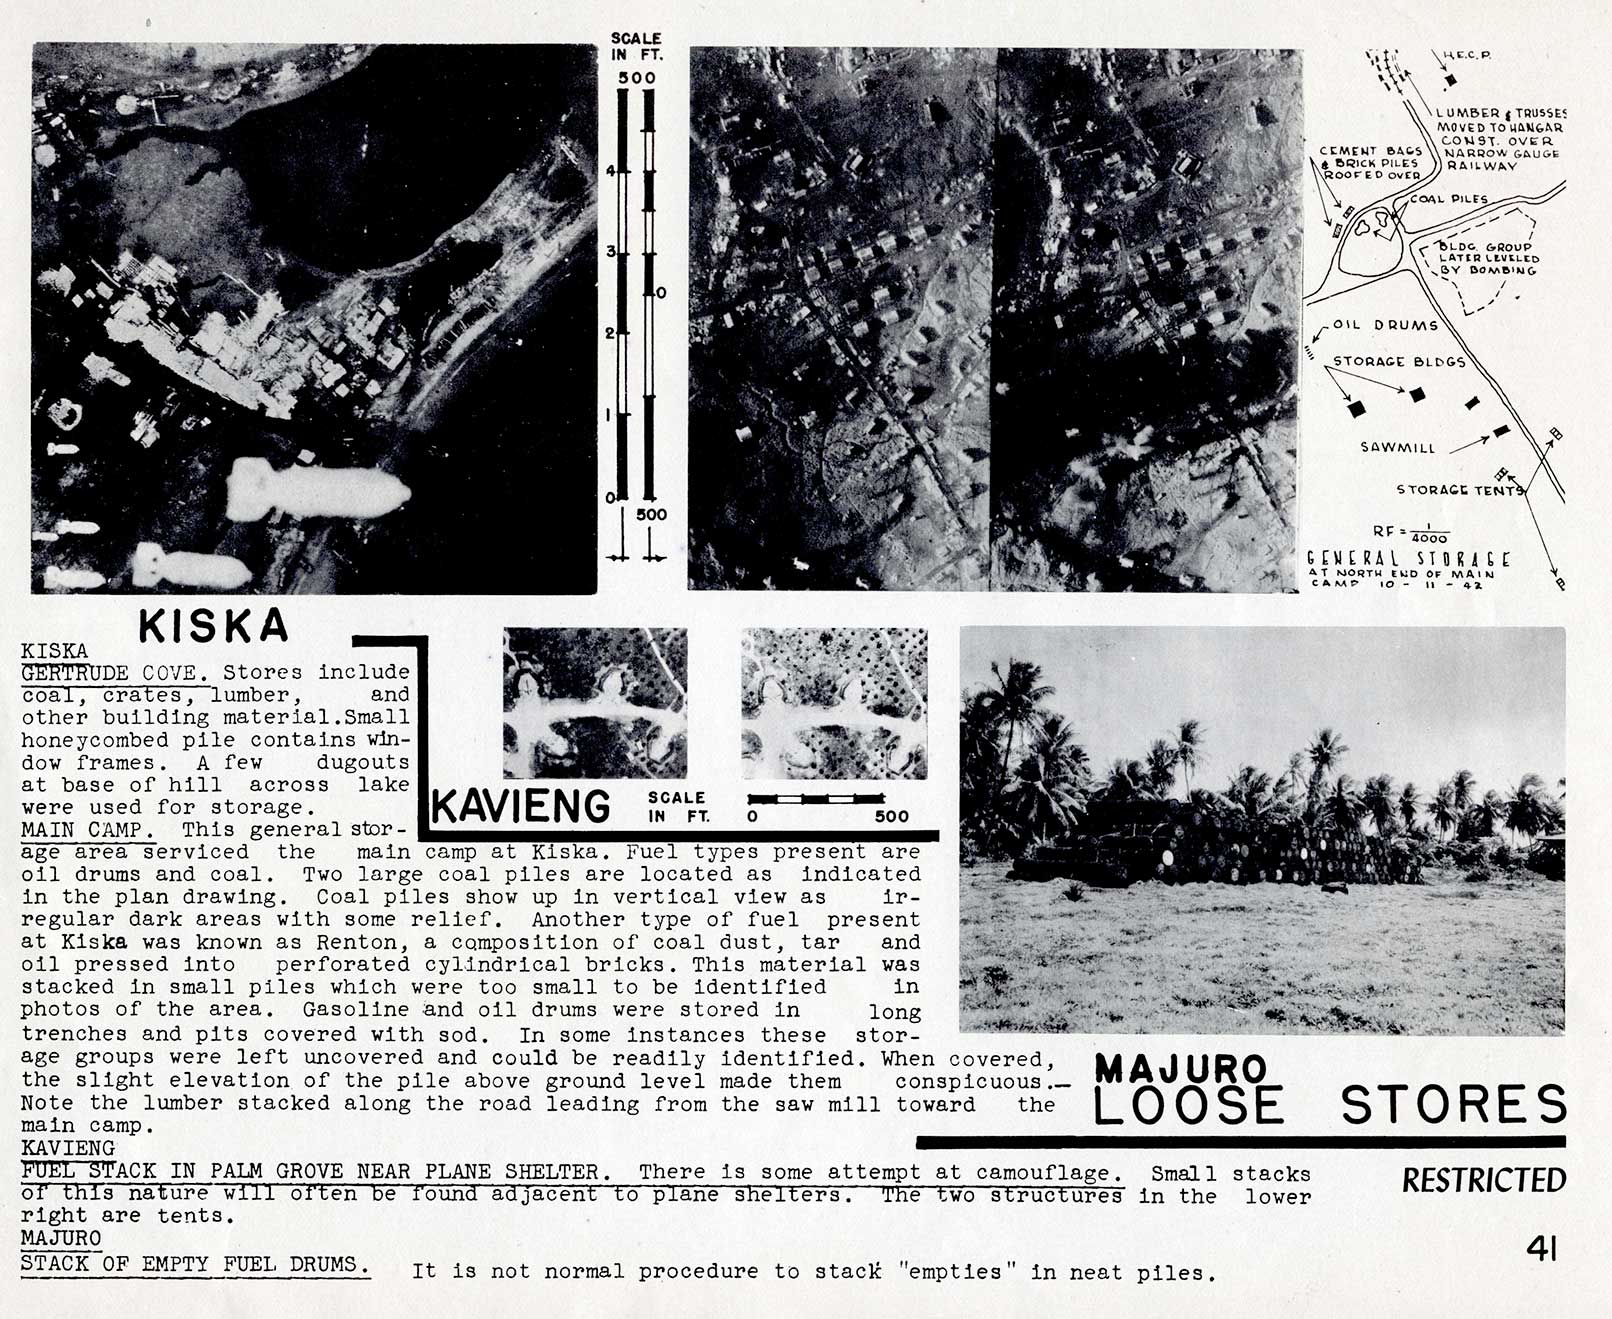 LOOSE STORES
KISKA
GERTRUDE COVE. Stores include coal, crates, lumber, and other building material. Small honeycombed pile contains window frames. A few dugouts at base of hill across lake were used for storage.

MAIN CAMP. This general storage area serviced the main camp at Kiska. Fuel types present are oil drums and coal. Two large coal piles are located as indicated in the plan drawing. Coal piles show up in vertical view as irregular dark areas with some relief. Another type of fuel present at Kiska was known as Renton, a composition of coal dust, tar and oil pressed into perforated cylindrical bricks. This material was stacked in small piles which were too small to be identified in photos of the area. Gasoline and oil drums were stored in long trenches and pits covered with sod. In some instances these storage groups were left uncovered and could be readily identified. When covered, the slight elevation of the pile above ground level made them conspicuous. Note the lumber stacked along the road leading from the saw mill toward the main camp.

KAVIENG 
FUEL STACK IN PALM GROVE NEAR PLANE SHELTER. There is some attempt at camouflage. Small stacks of nature will often be found adjacent to plane shelters. The two structures in the lower right are tents.

MAJURO
STACK OF EMPTY FUEL DRUMS. It is not normal procedure to stack 'empties' in neat piles.
41
